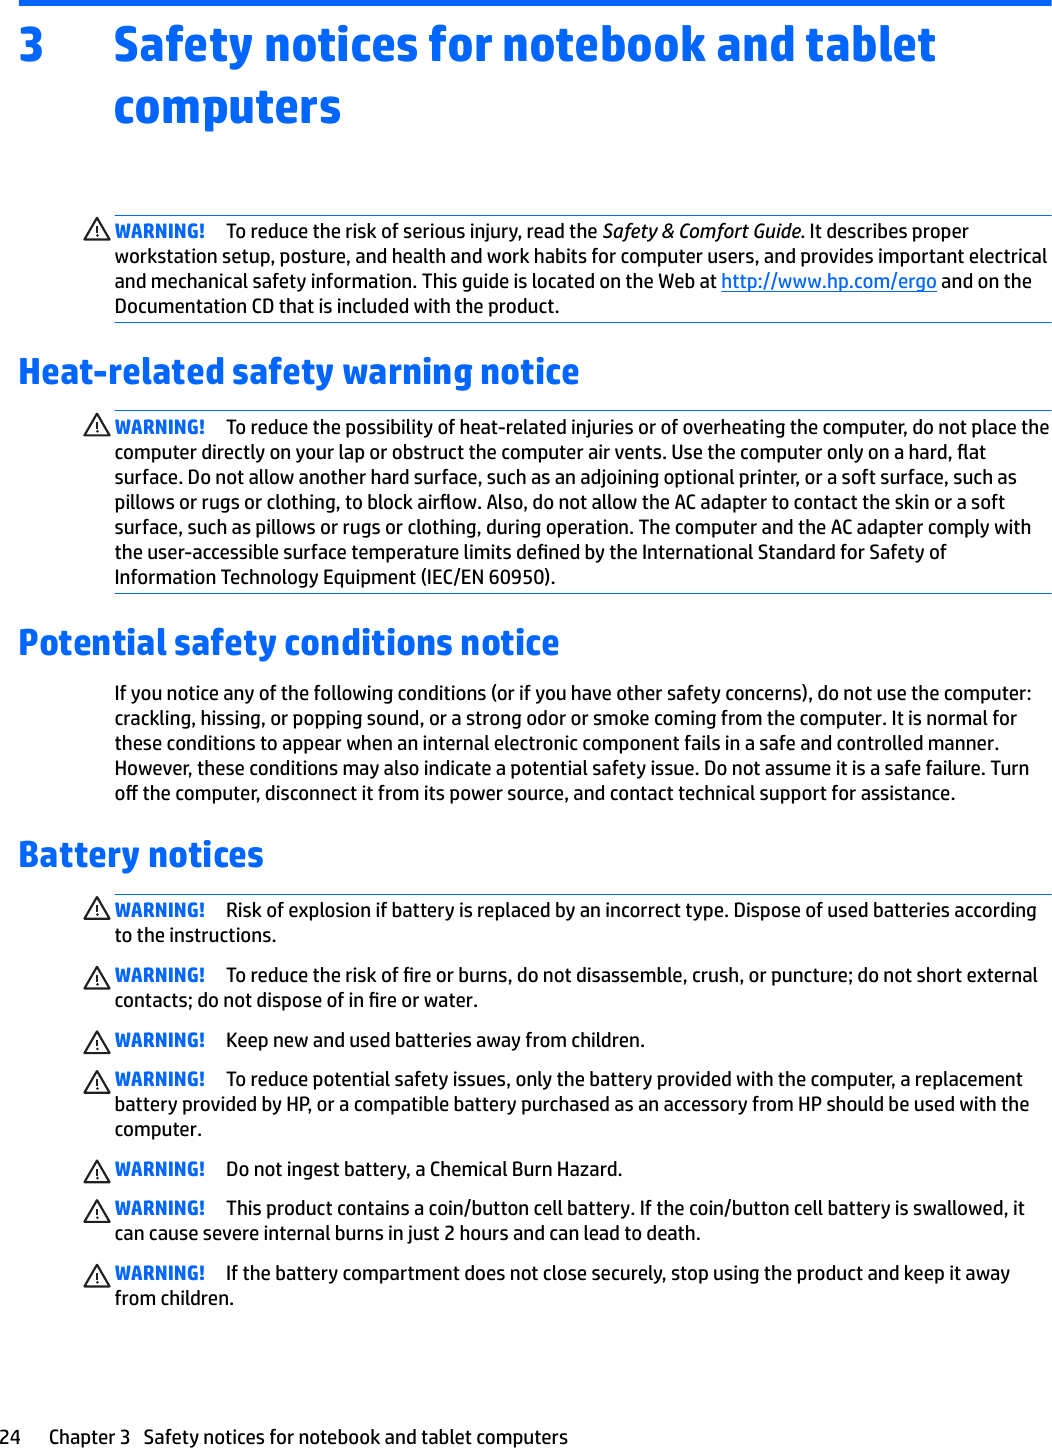 3 Safety notices for notebook and tablet computersWARNING! To reduce the risk of serious injury, read the Safety &amp; Comfort Guide. It describes proper workstation setup, posture, and health and work habits for computer users, and provides important electrical and mechanical safety information. This guide is located on the Web at http://www.hp.com/ergo and on the Documentation CD that is included with the product.Heat-related safety warning noticeWARNING! To reduce the possibility of heat-related injuries or of overheating the computer, do not place the computer directly on your lap or obstruct the computer air vents. Use the computer only on a hard, at surface. Do not allow another hard surface, such as an adjoining optional printer, or a soft surface, such as pillows or rugs or clothing, to block airow. Also, do not allow the AC adapter to contact the skin or a soft surface, such as pillows or rugs or clothing, during operation. The computer and the AC adapter comply with the user-accessible surface temperature limits dened by the International Standard for Safety of Information Technology Equipment (IEC/EN 60950).Potential safety conditions noticeIf you notice any of the following conditions (or if you have other safety concerns), do not use the computer: crackling, hissing, or popping sound, or a strong odor or smoke coming from the computer. It is normal for these conditions to appear when an internal electronic component fails in a safe and controlled manner. However, these conditions may also indicate a potential safety issue. Do not assume it is a safe failure. Turn o the computer, disconnect it from its power source, and contact technical support for assistance.Battery noticesWARNING! Risk of explosion if battery is replaced by an incorrect type. Dispose of used batteries according to the instructions.WARNING! To reduce the risk of re or burns, do not disassemble, crush, or puncture; do not short external contacts; do not dispose of in re or water.WARNING! Keep new and used batteries away from children.WARNING! To reduce potential safety issues, only the battery provided with the computer, a replacement battery provided by HP, or a compatible battery purchased as an accessory from HP should be used with the computer.WARNING! Do not ingest battery, a Chemical Burn Hazard.WARNING! This product contains a coin/button cell battery. If the coin/button cell battery is swallowed, it can cause severe internal burns in just 2 hours and can lead to death.WARNING! If the battery compartment does not close securely, stop using the product and keep it away from children.24 Chapter 3   Safety notices for notebook and tablet computers